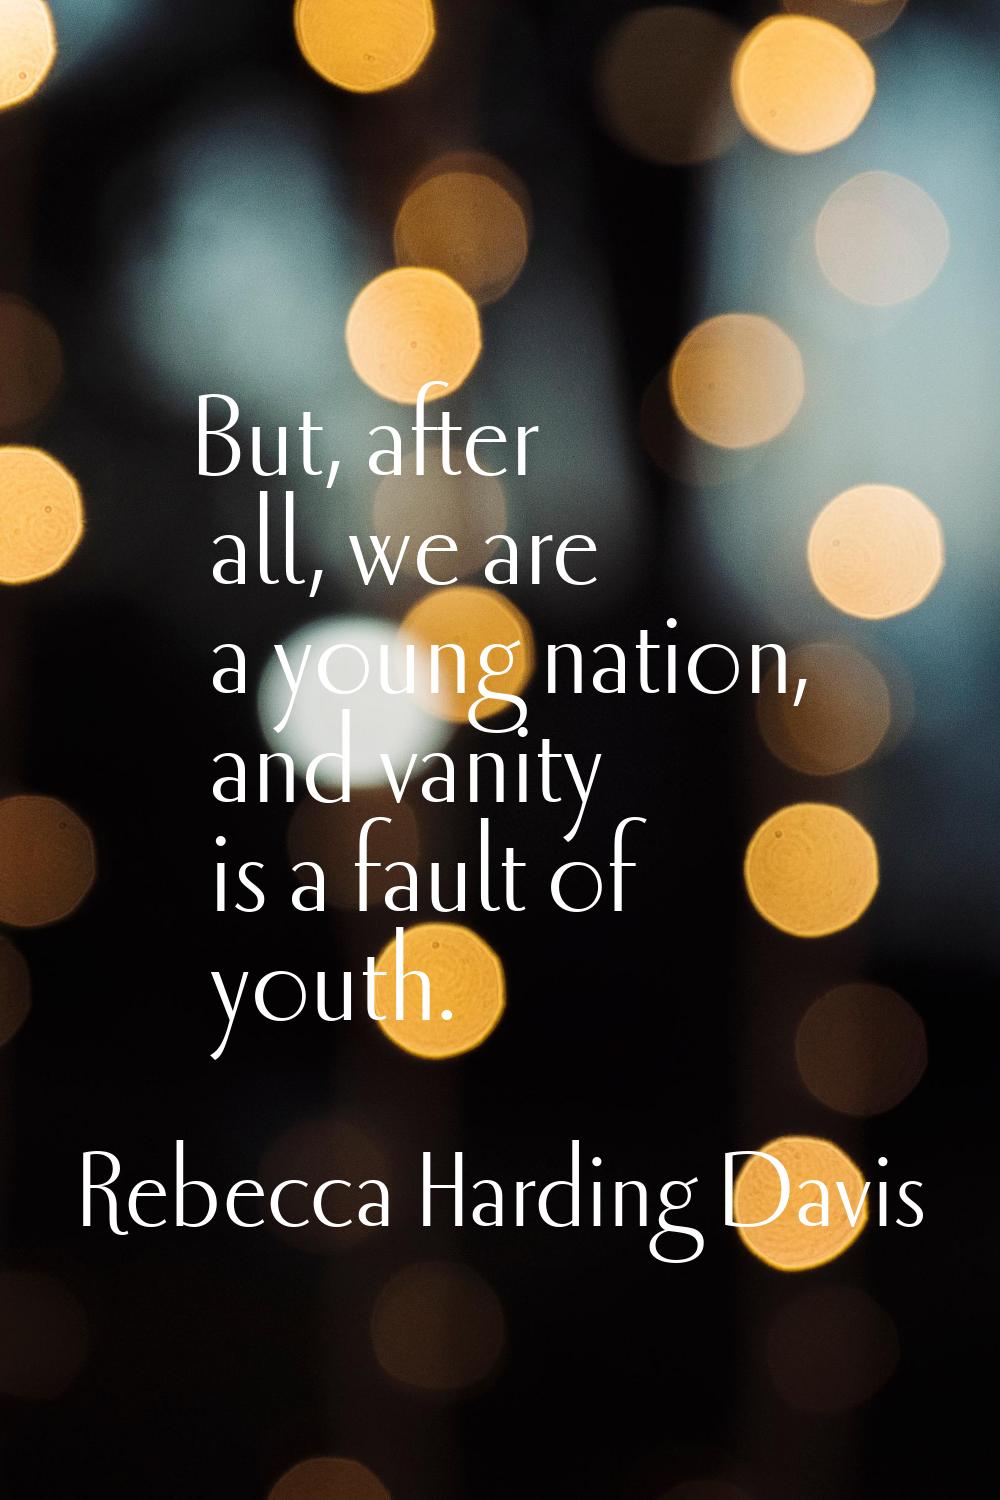 But, after all, we are a young nation, and vanity is a fault of youth.